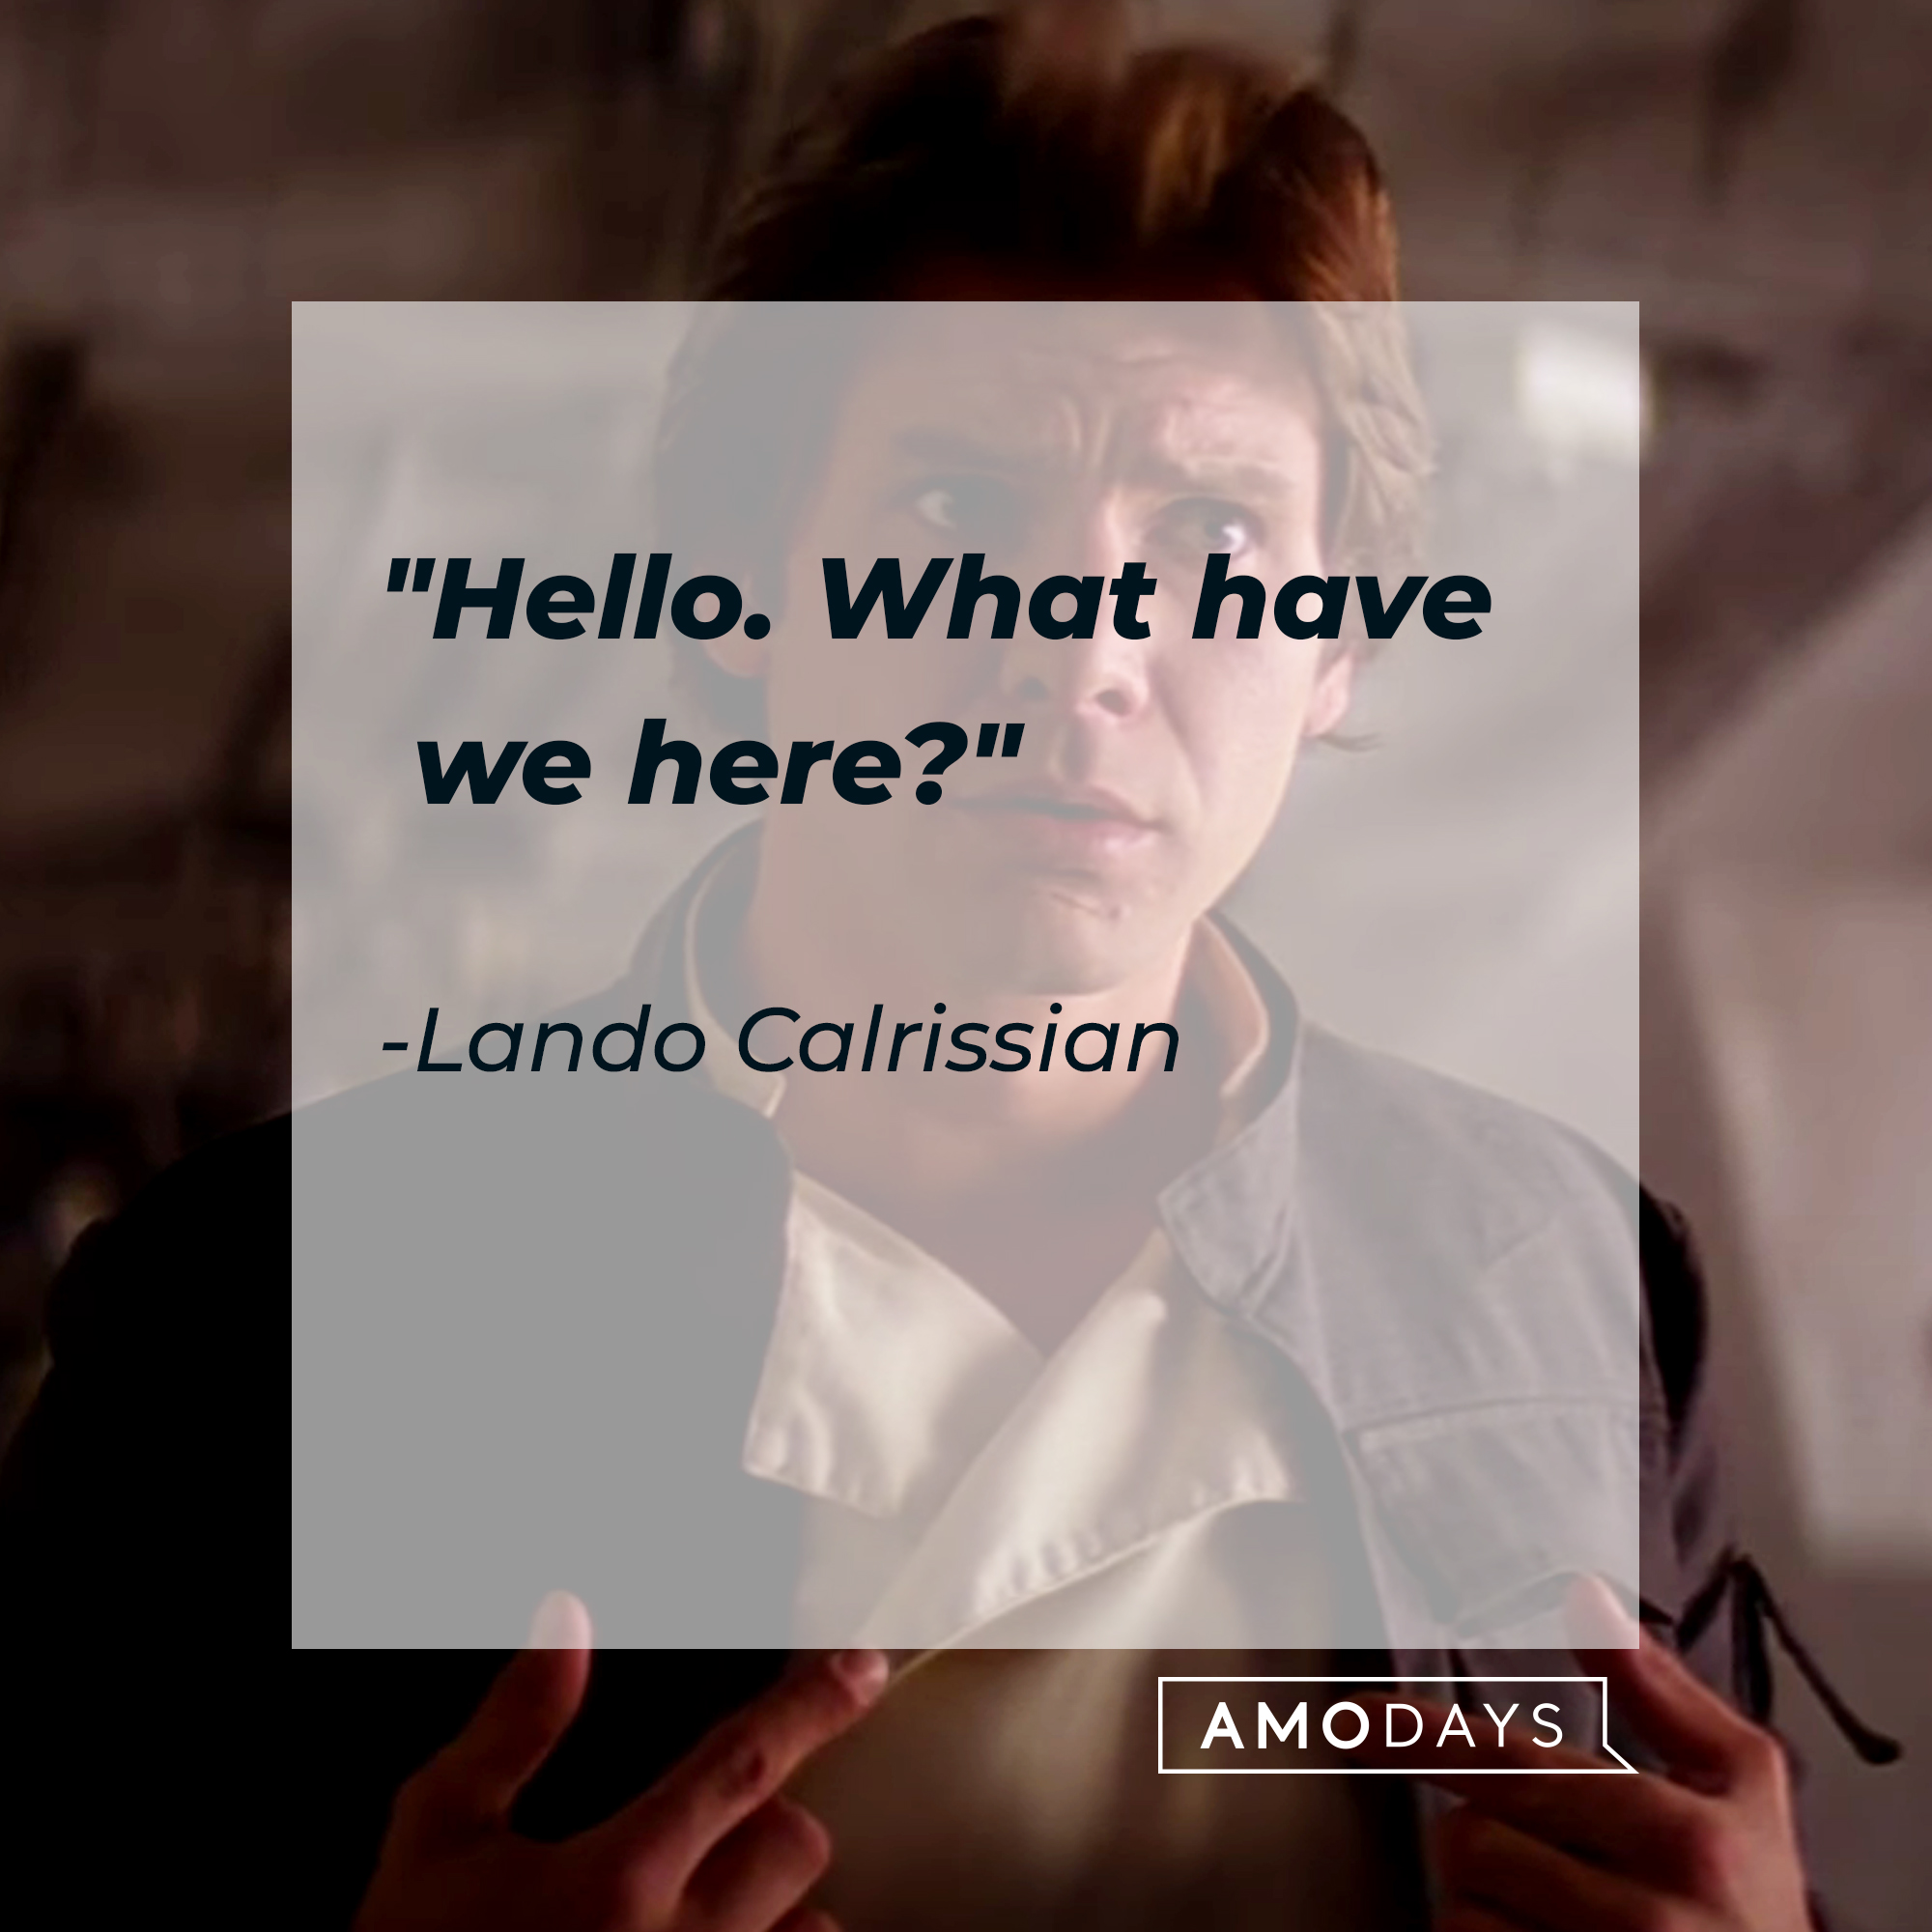 Lando Calrissian's quote, "Hello. What have we here?" | Source: Facebook/StarWars